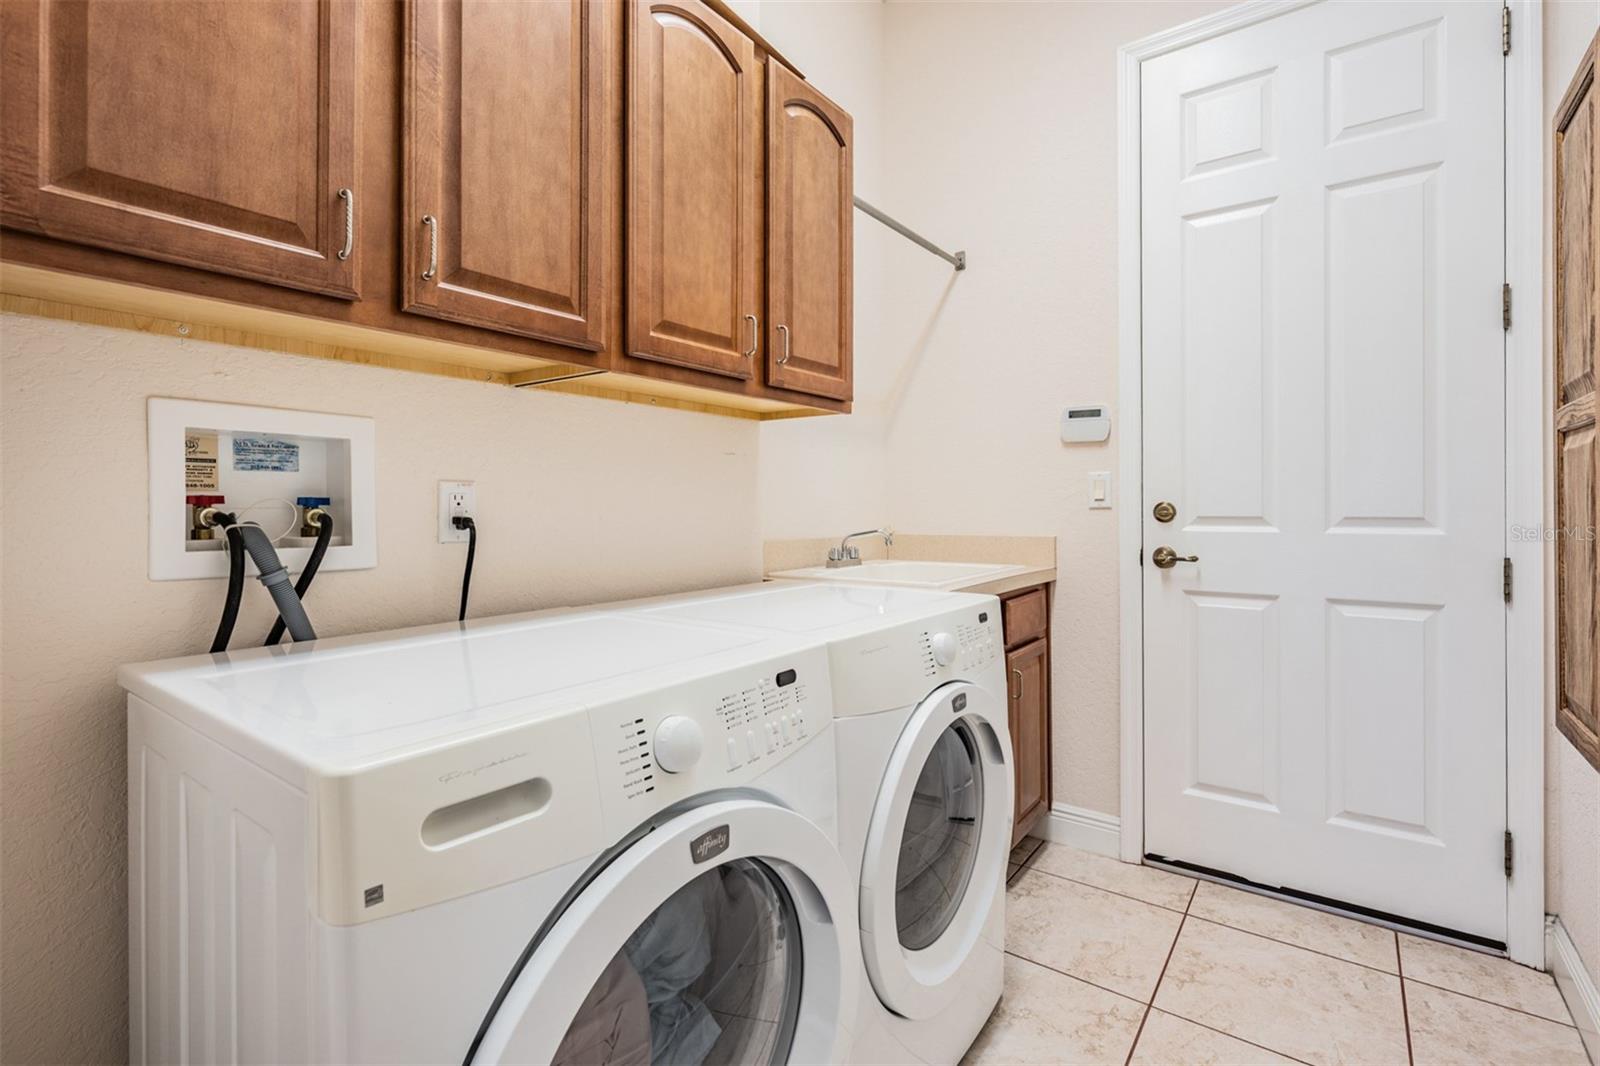 Custom built in ironing board in this functional laundry room!